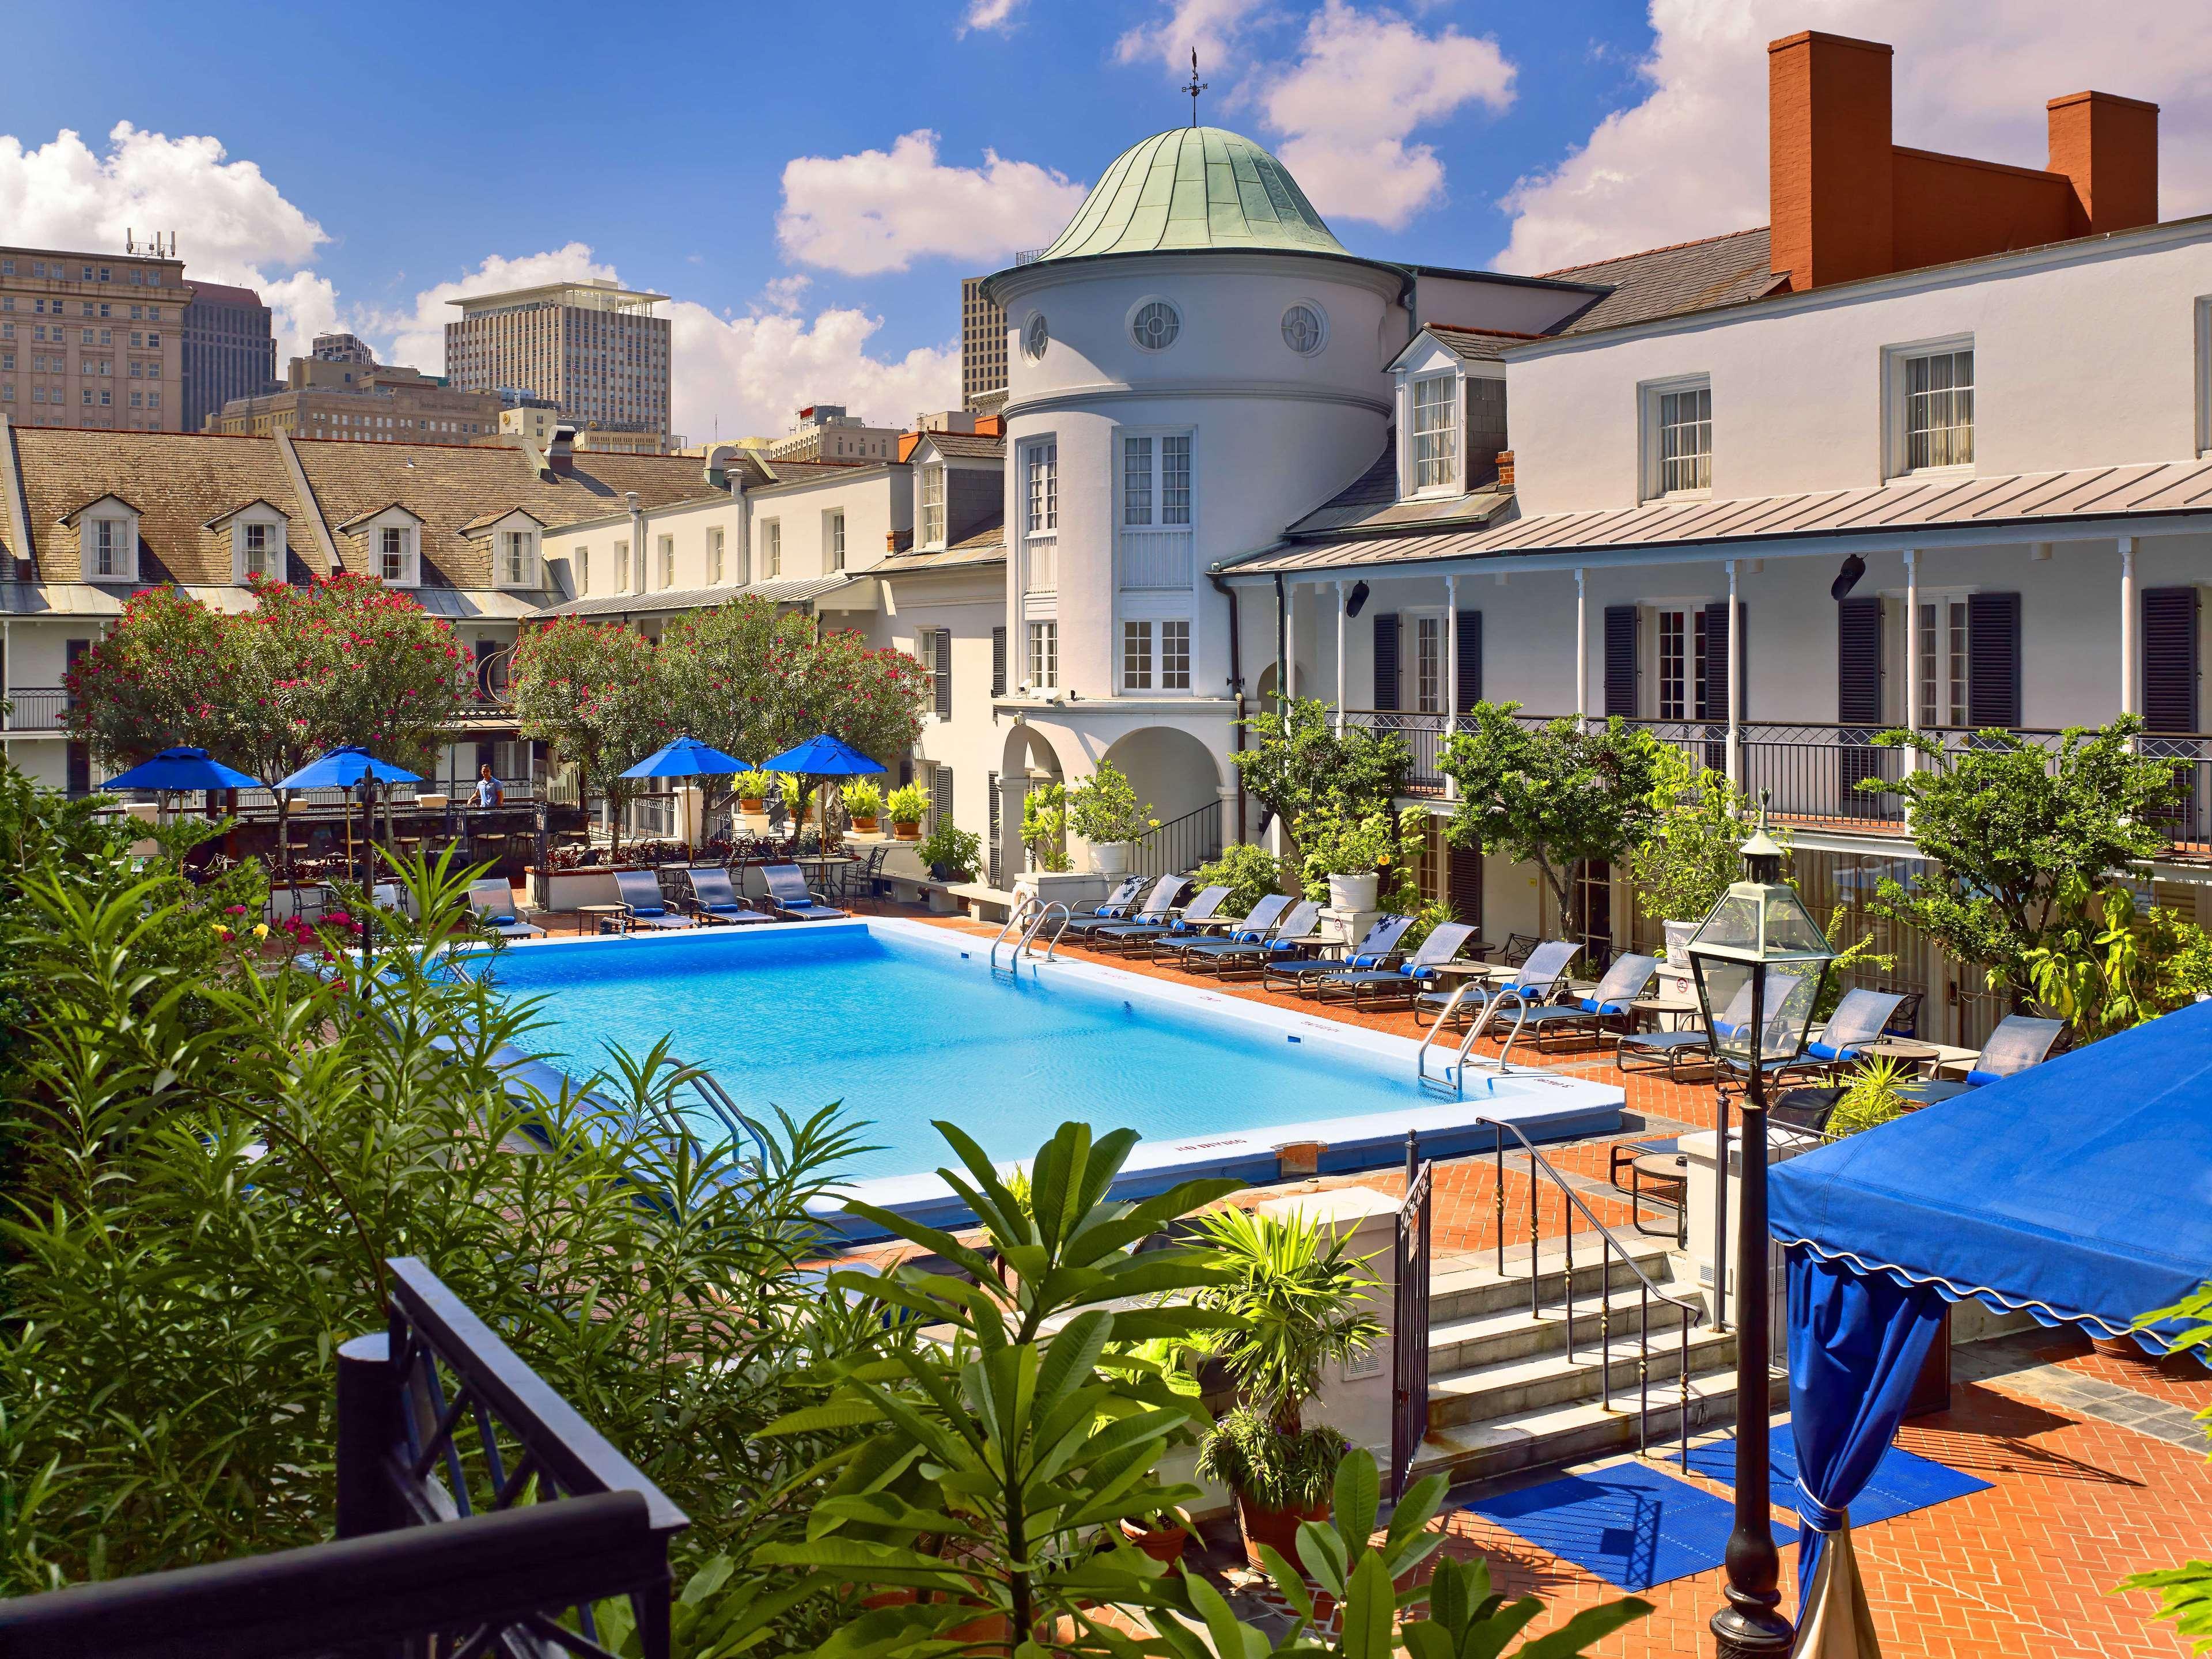 HOTEL THE ROYAL SONESTA NEW ORLEANS, LA 4* (United States) - from